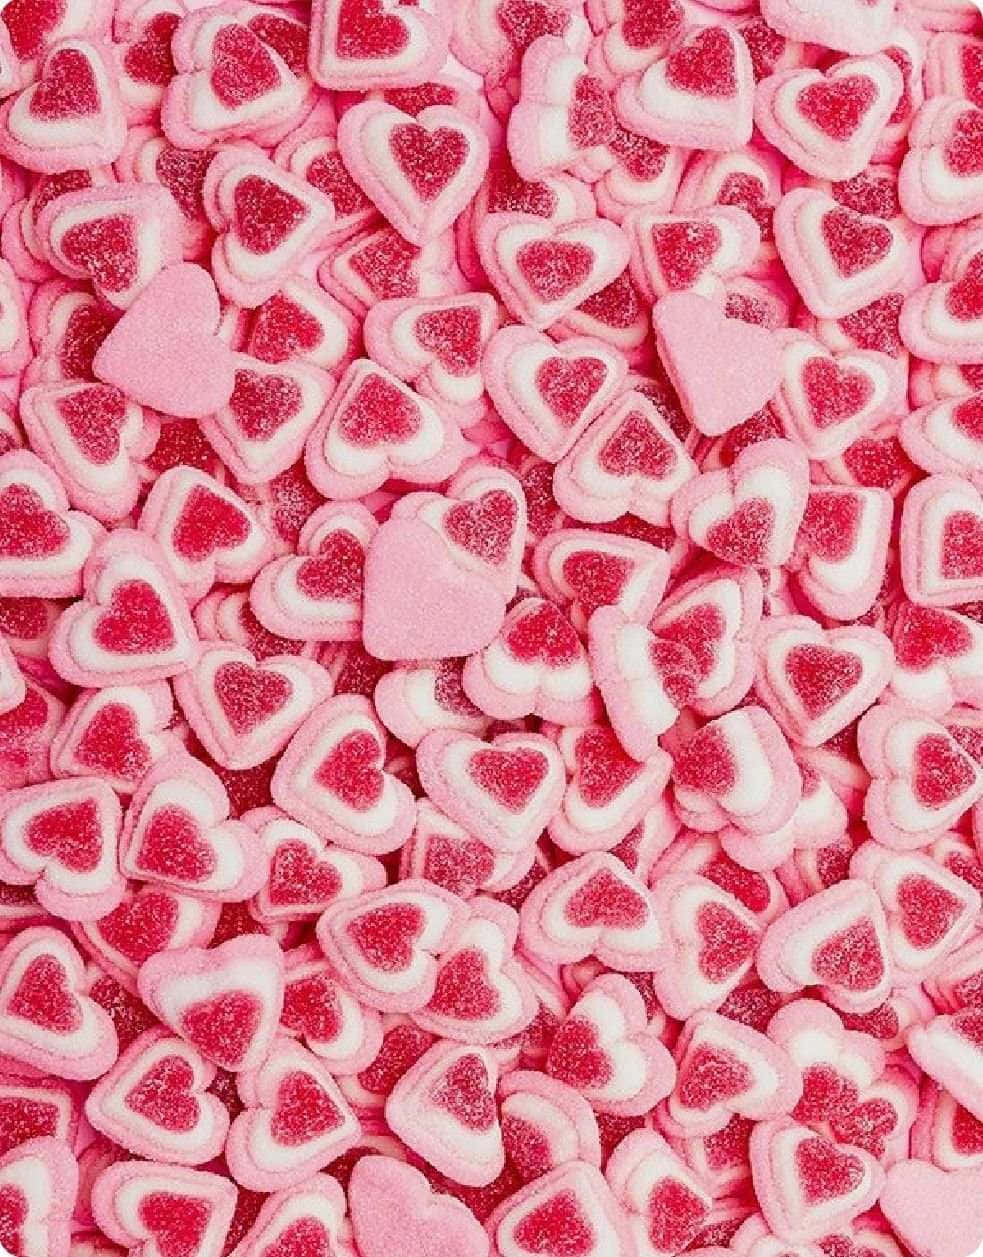 Pink Heart Candies Lovecore Texture